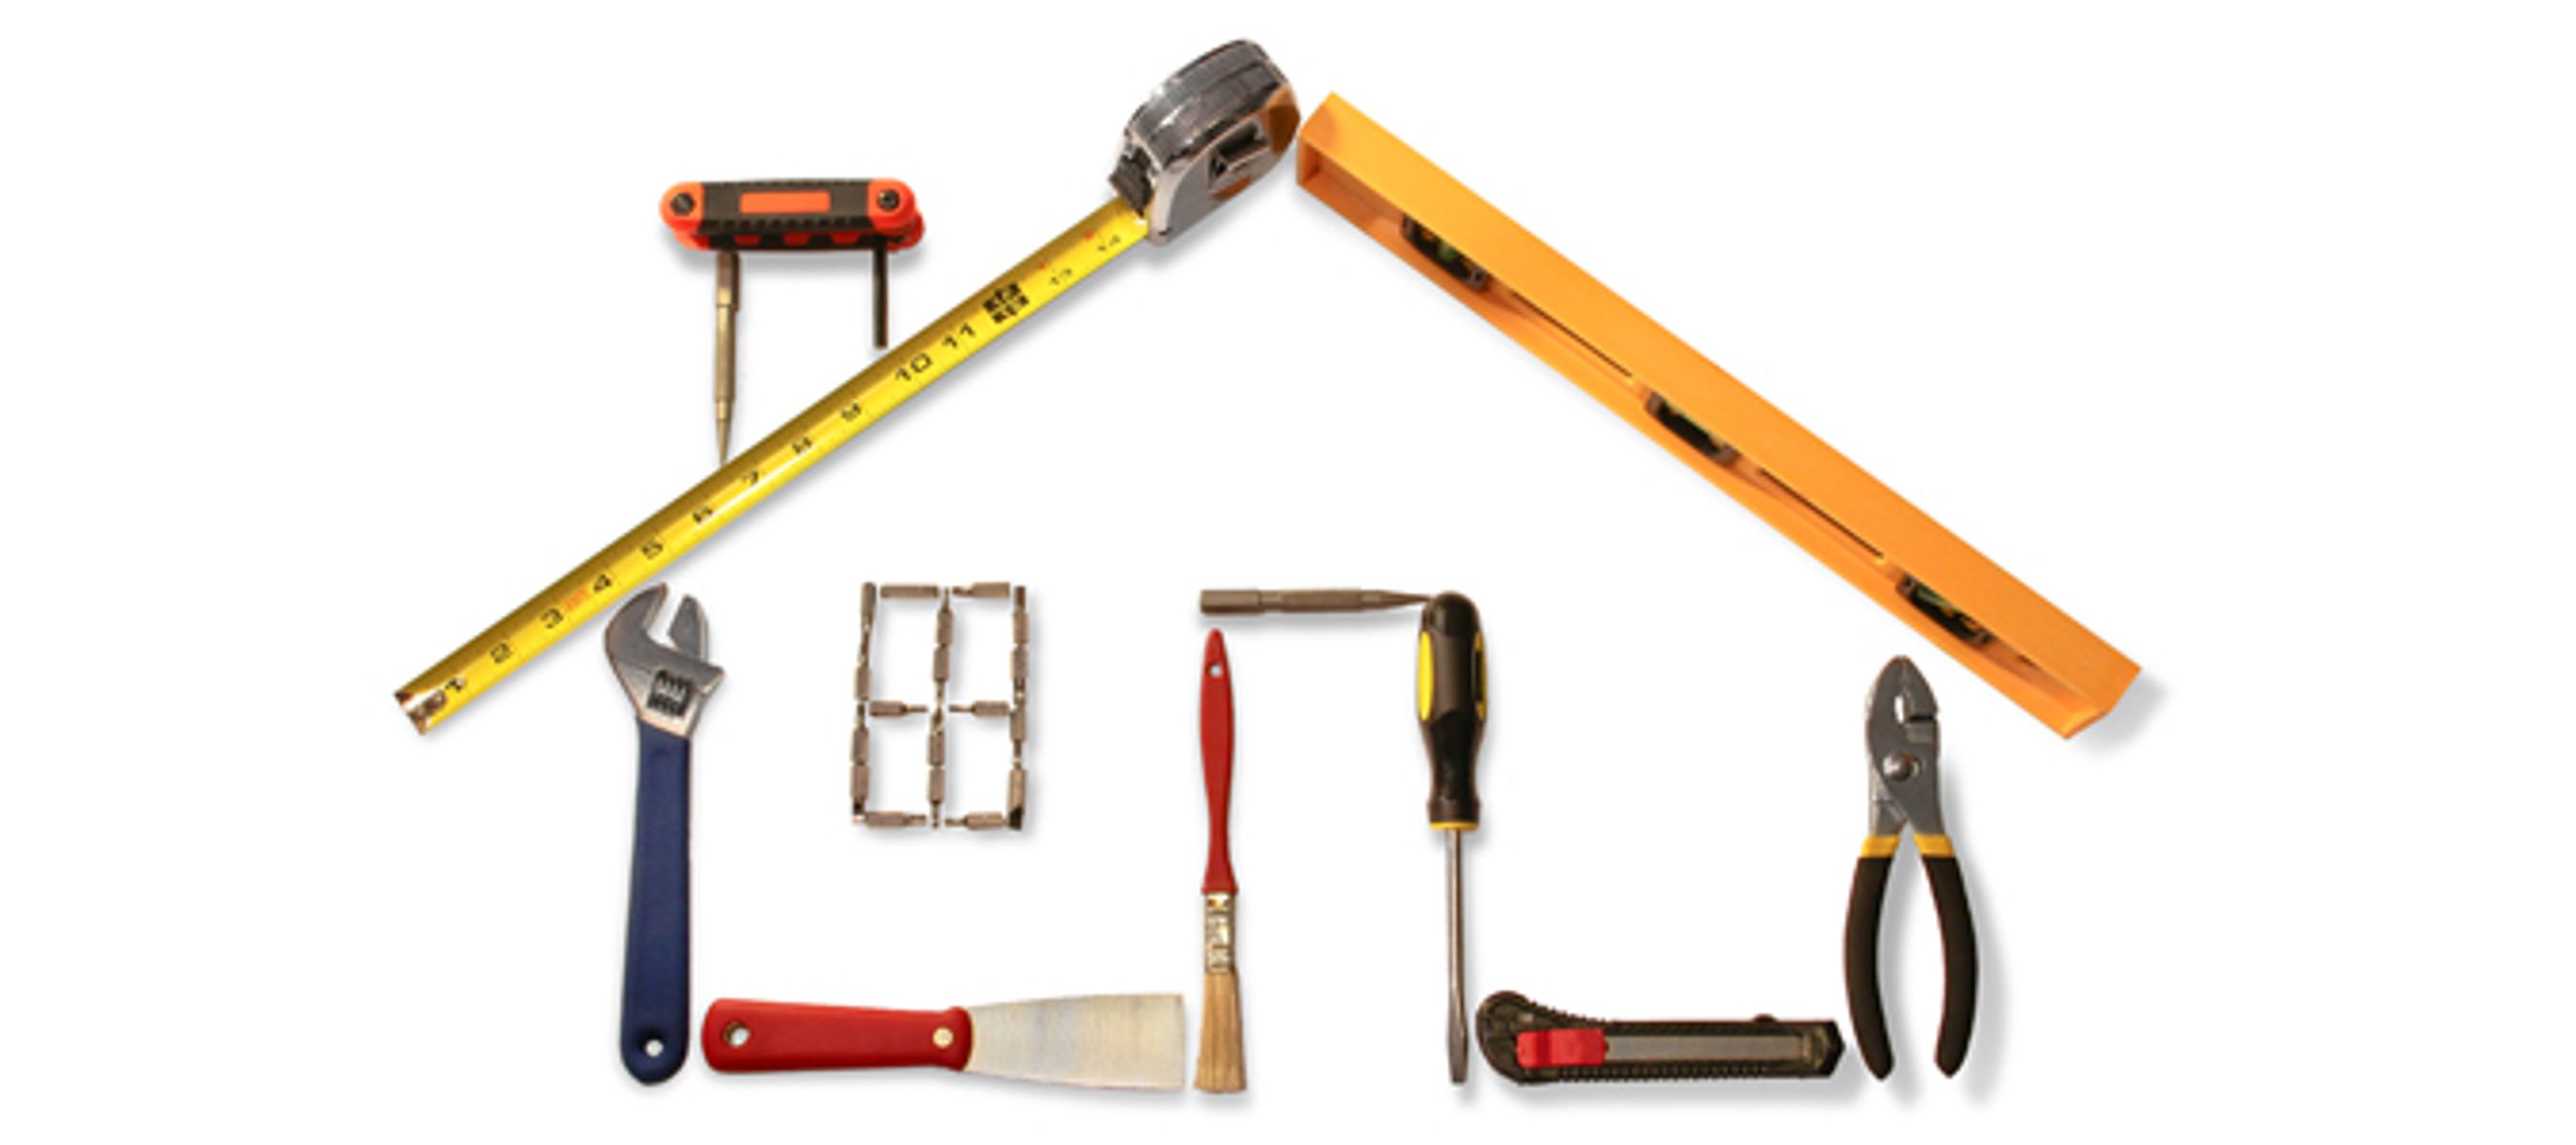 Tradie rates: The ultimate guide on what to expect